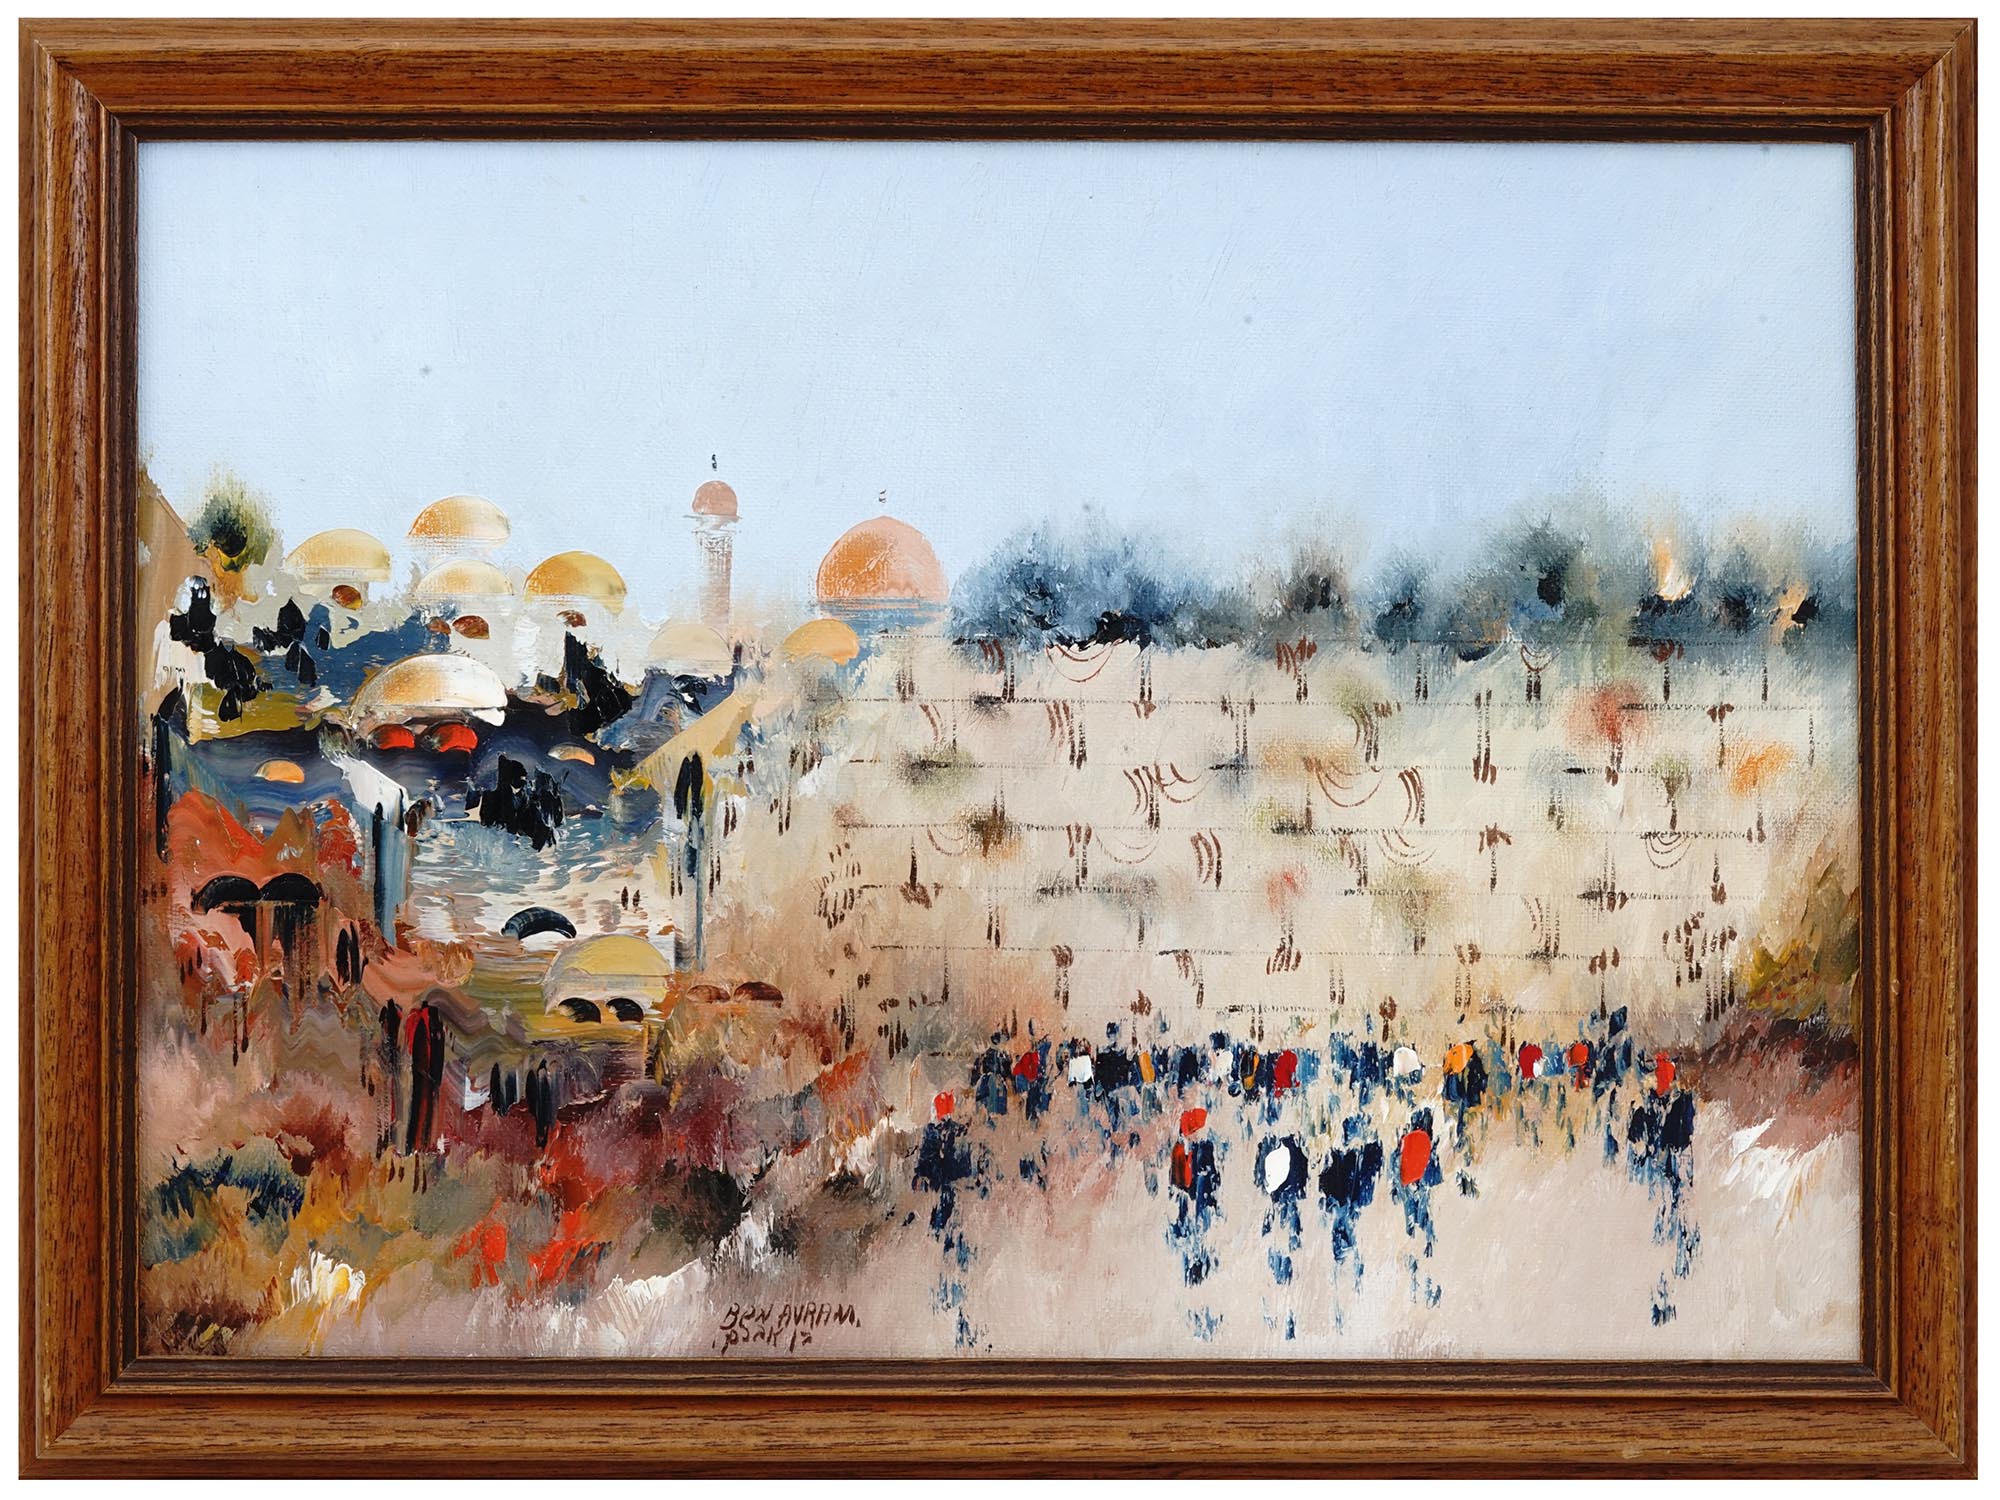 JUDAICA WAILING WALL OIL PAINTING BY BEN AVRAM PIC-0